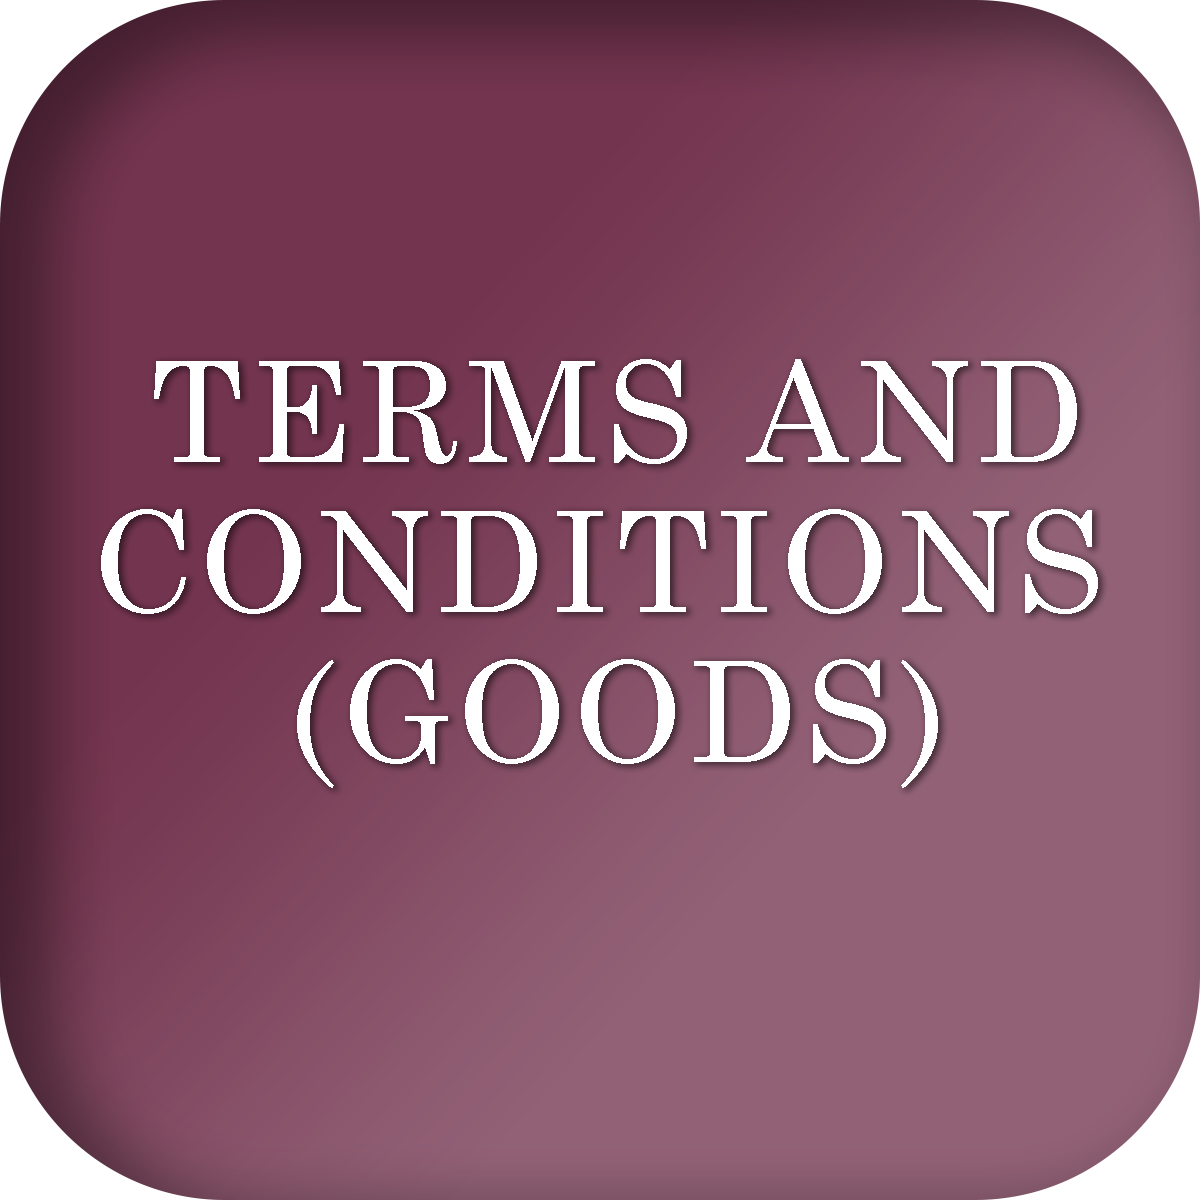 Terms and conditions goods